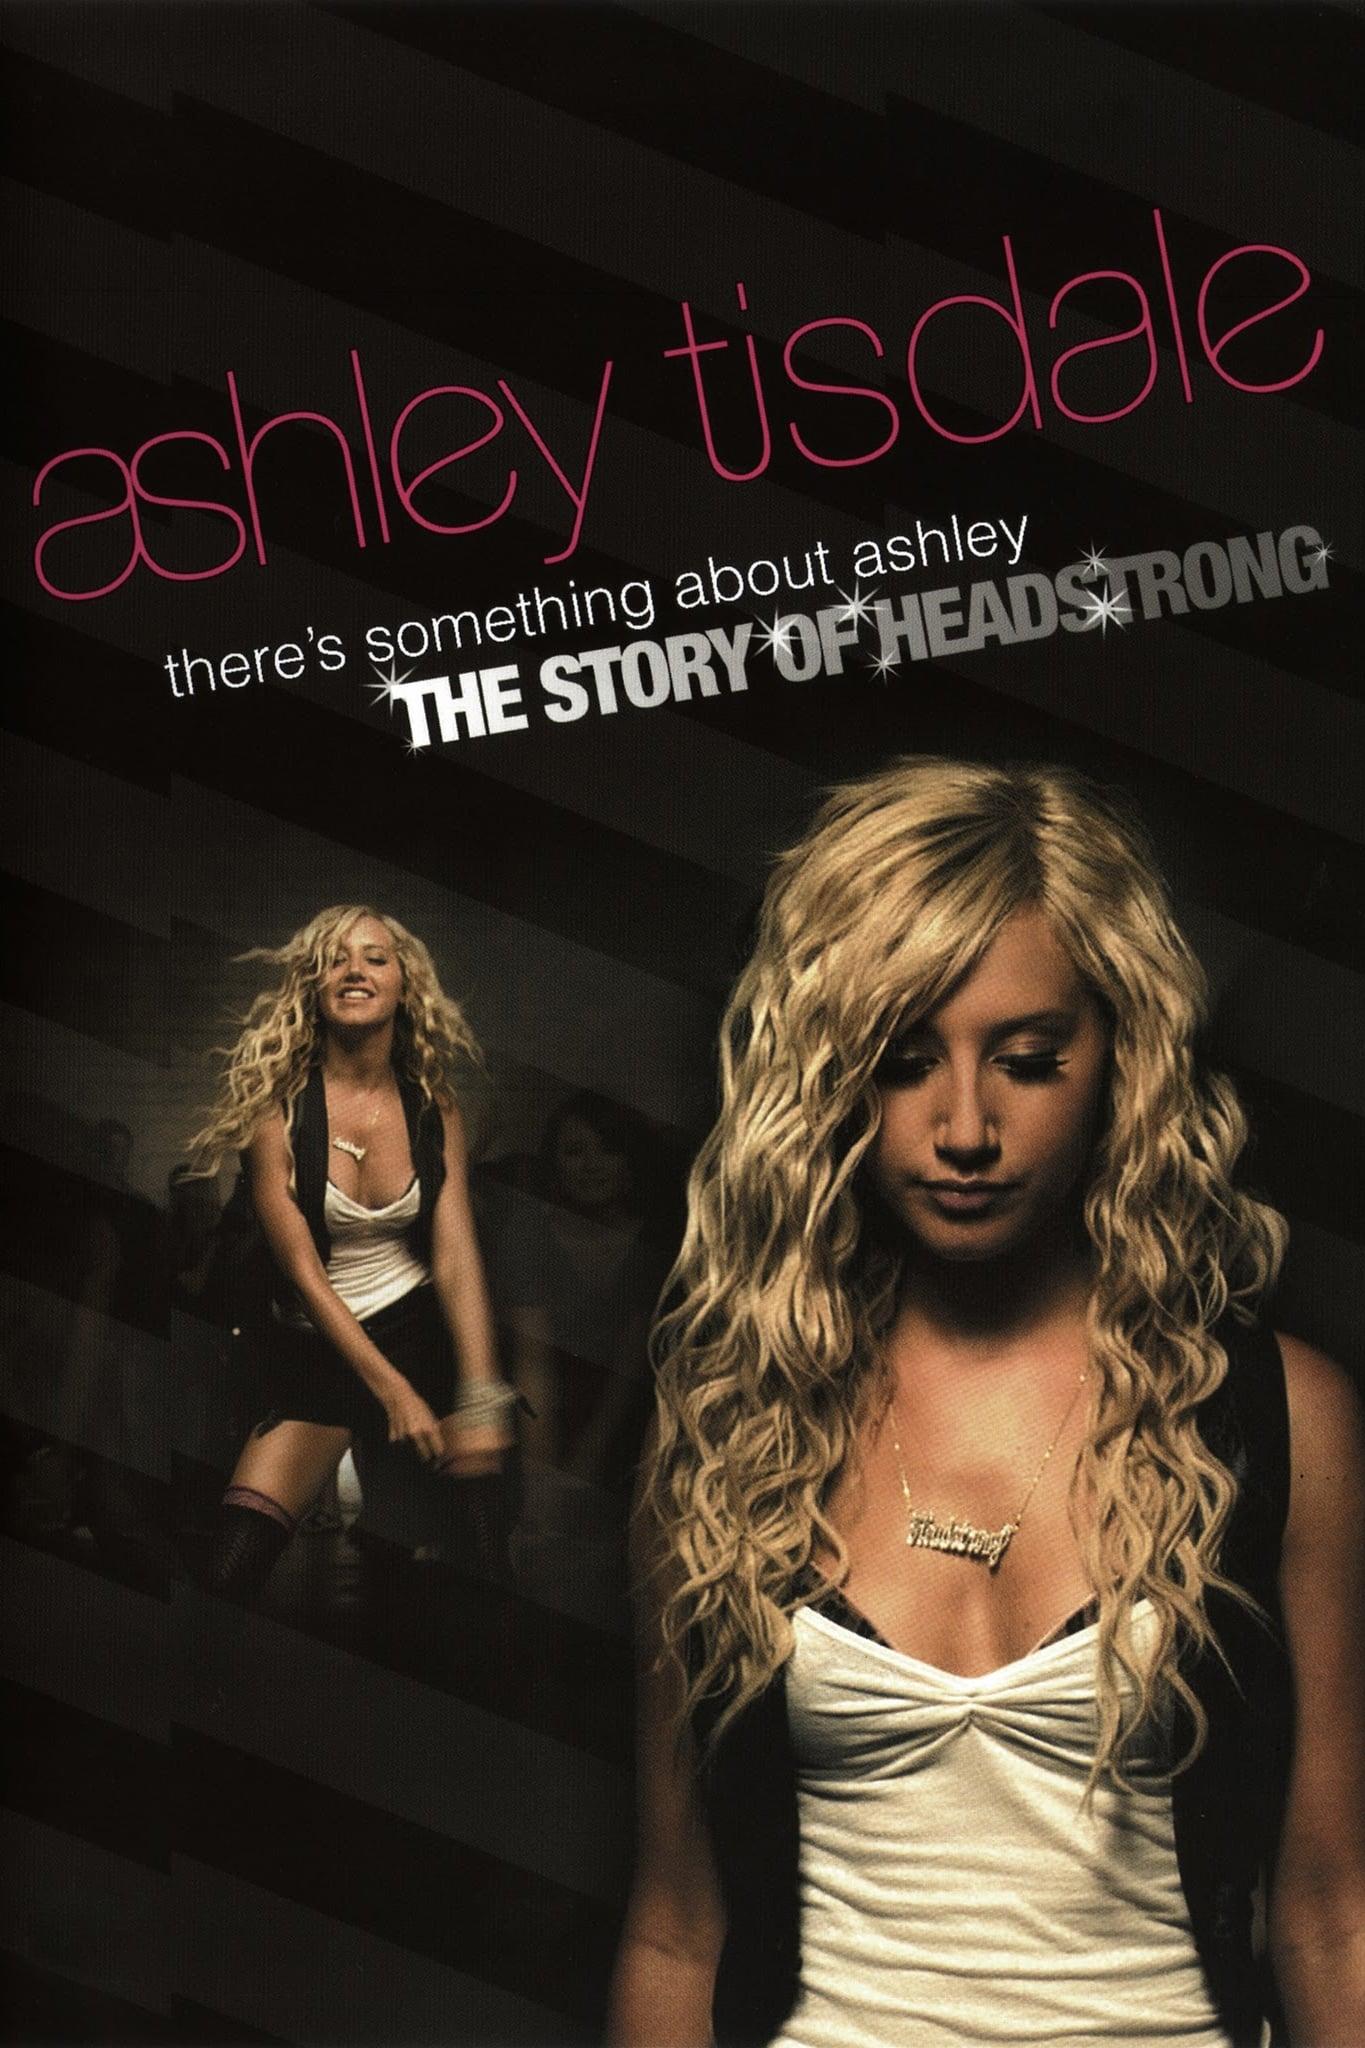 There's Something About Ashley: The Story of Headstrong poster